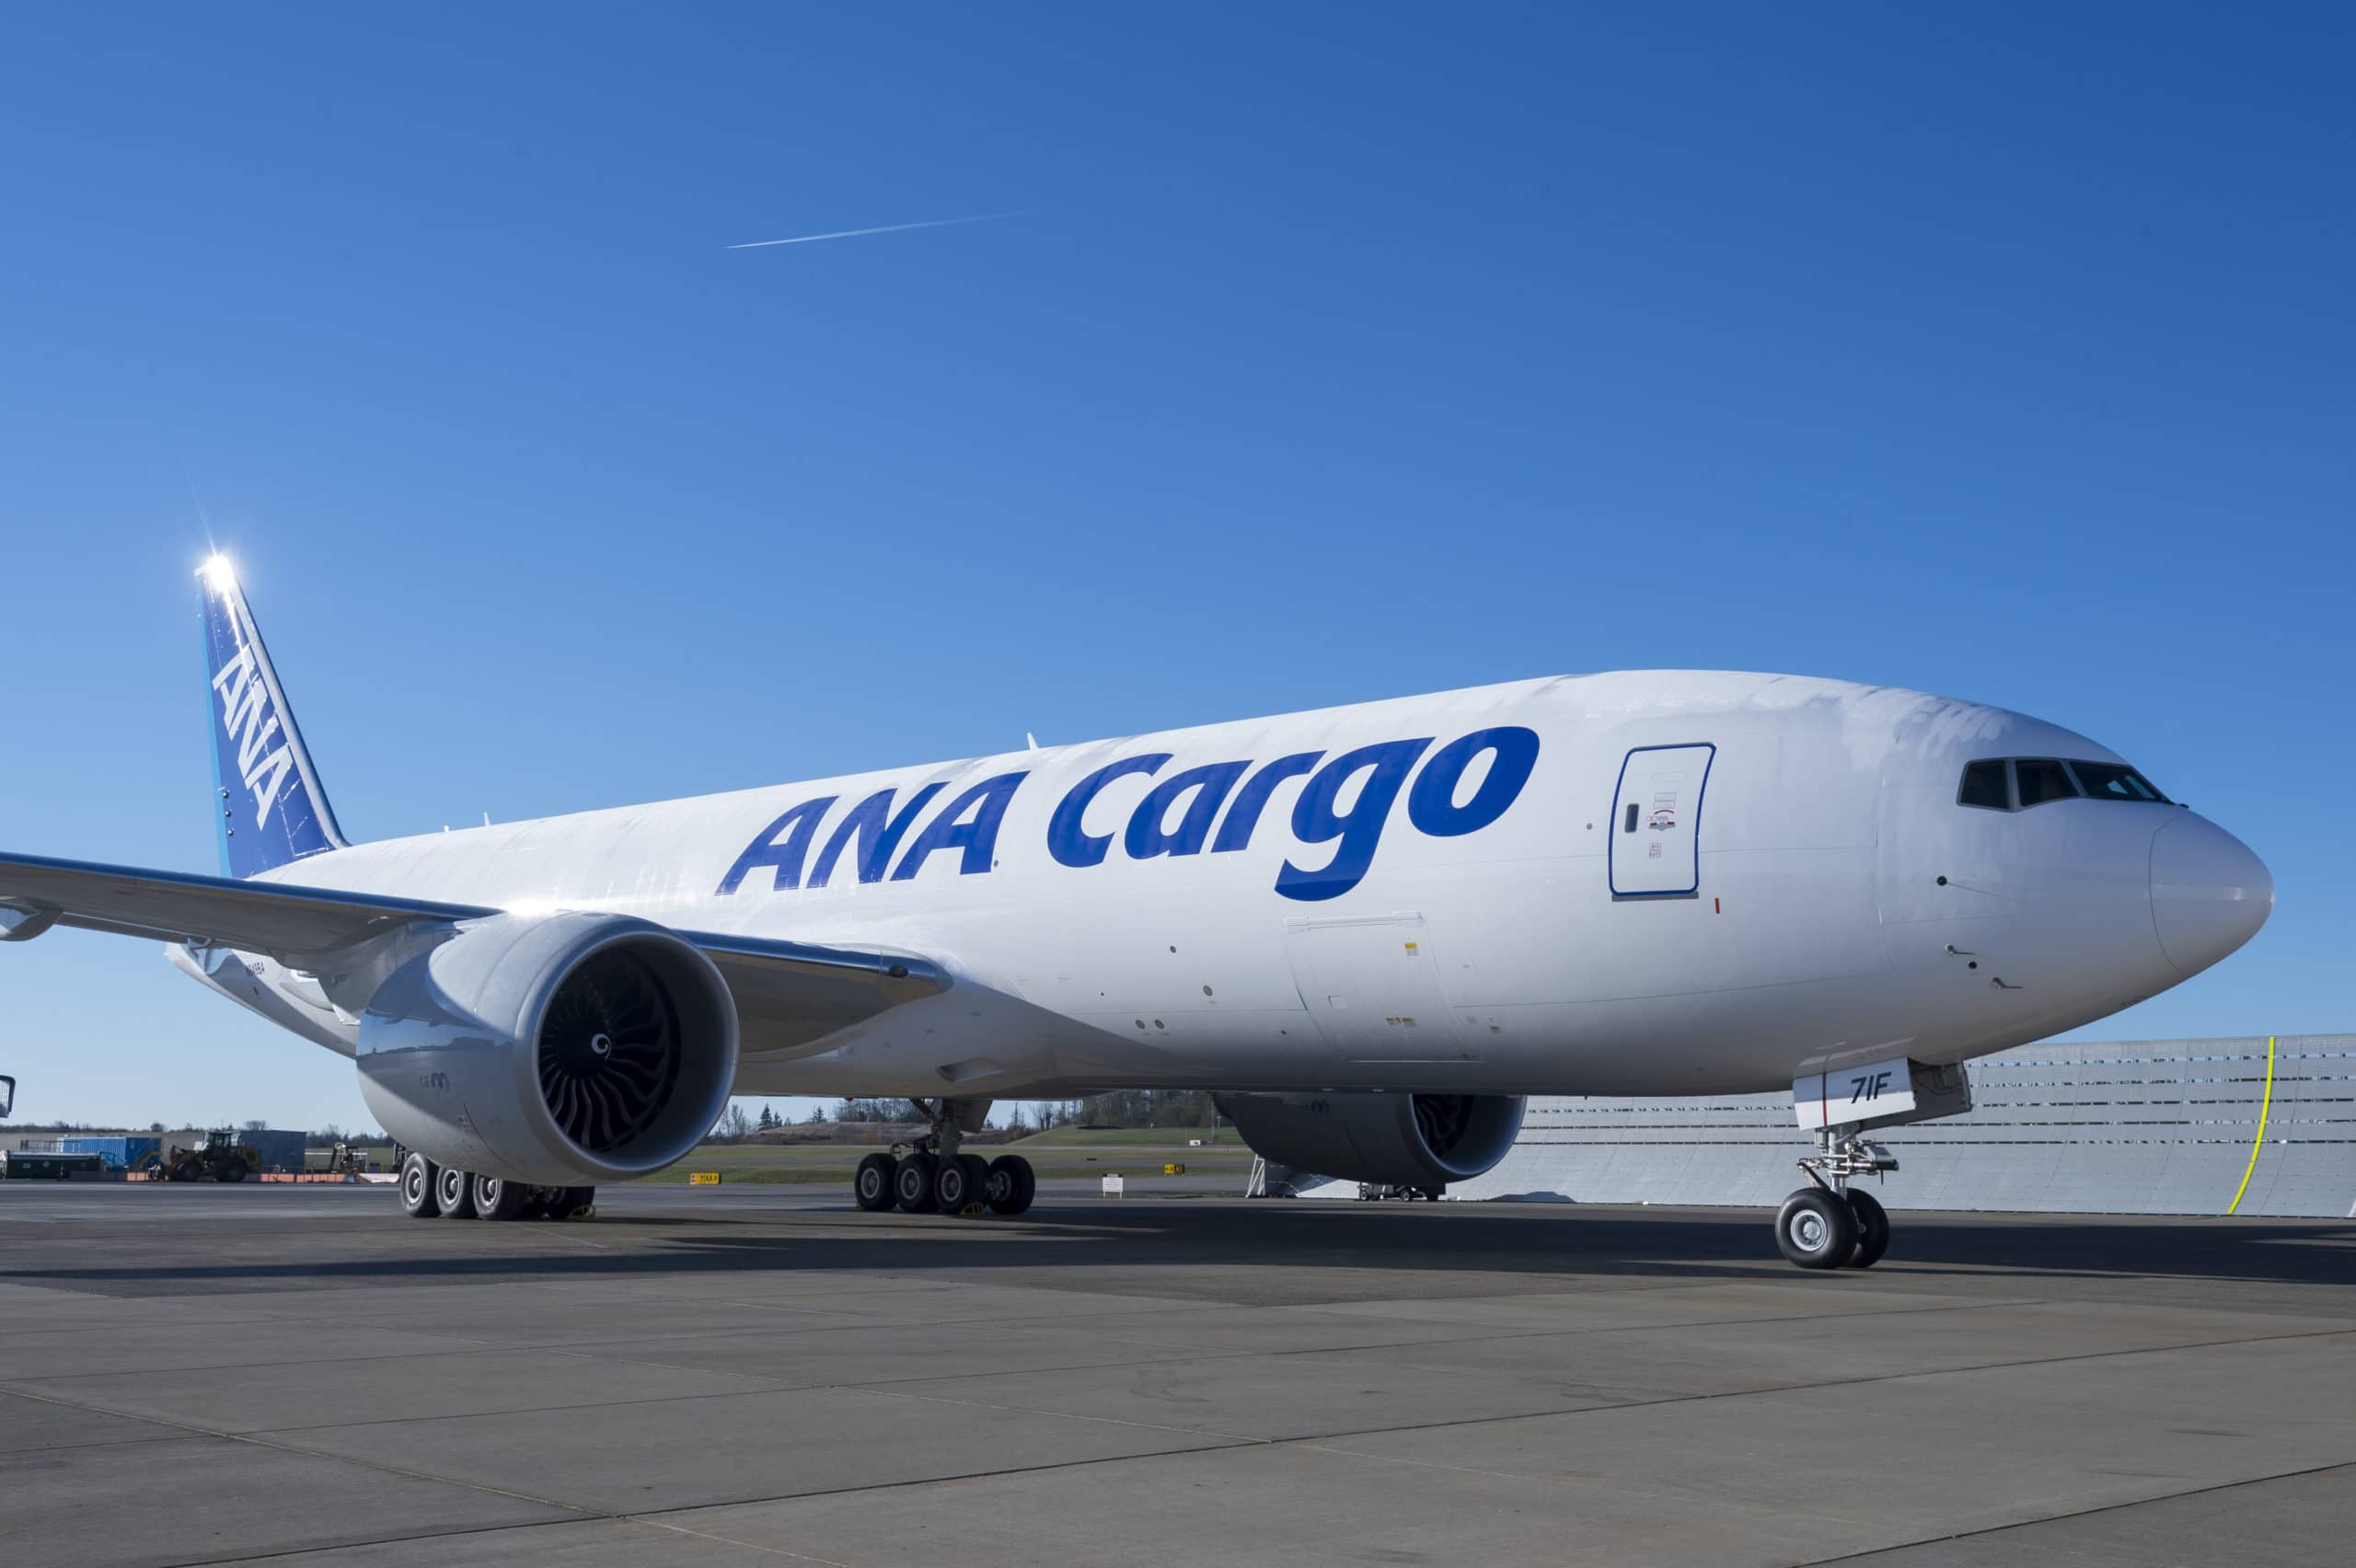 ANA Cargo's second 777F has arrived in Japan and like the first aircraft, is expected to commence commercial operations this summer.